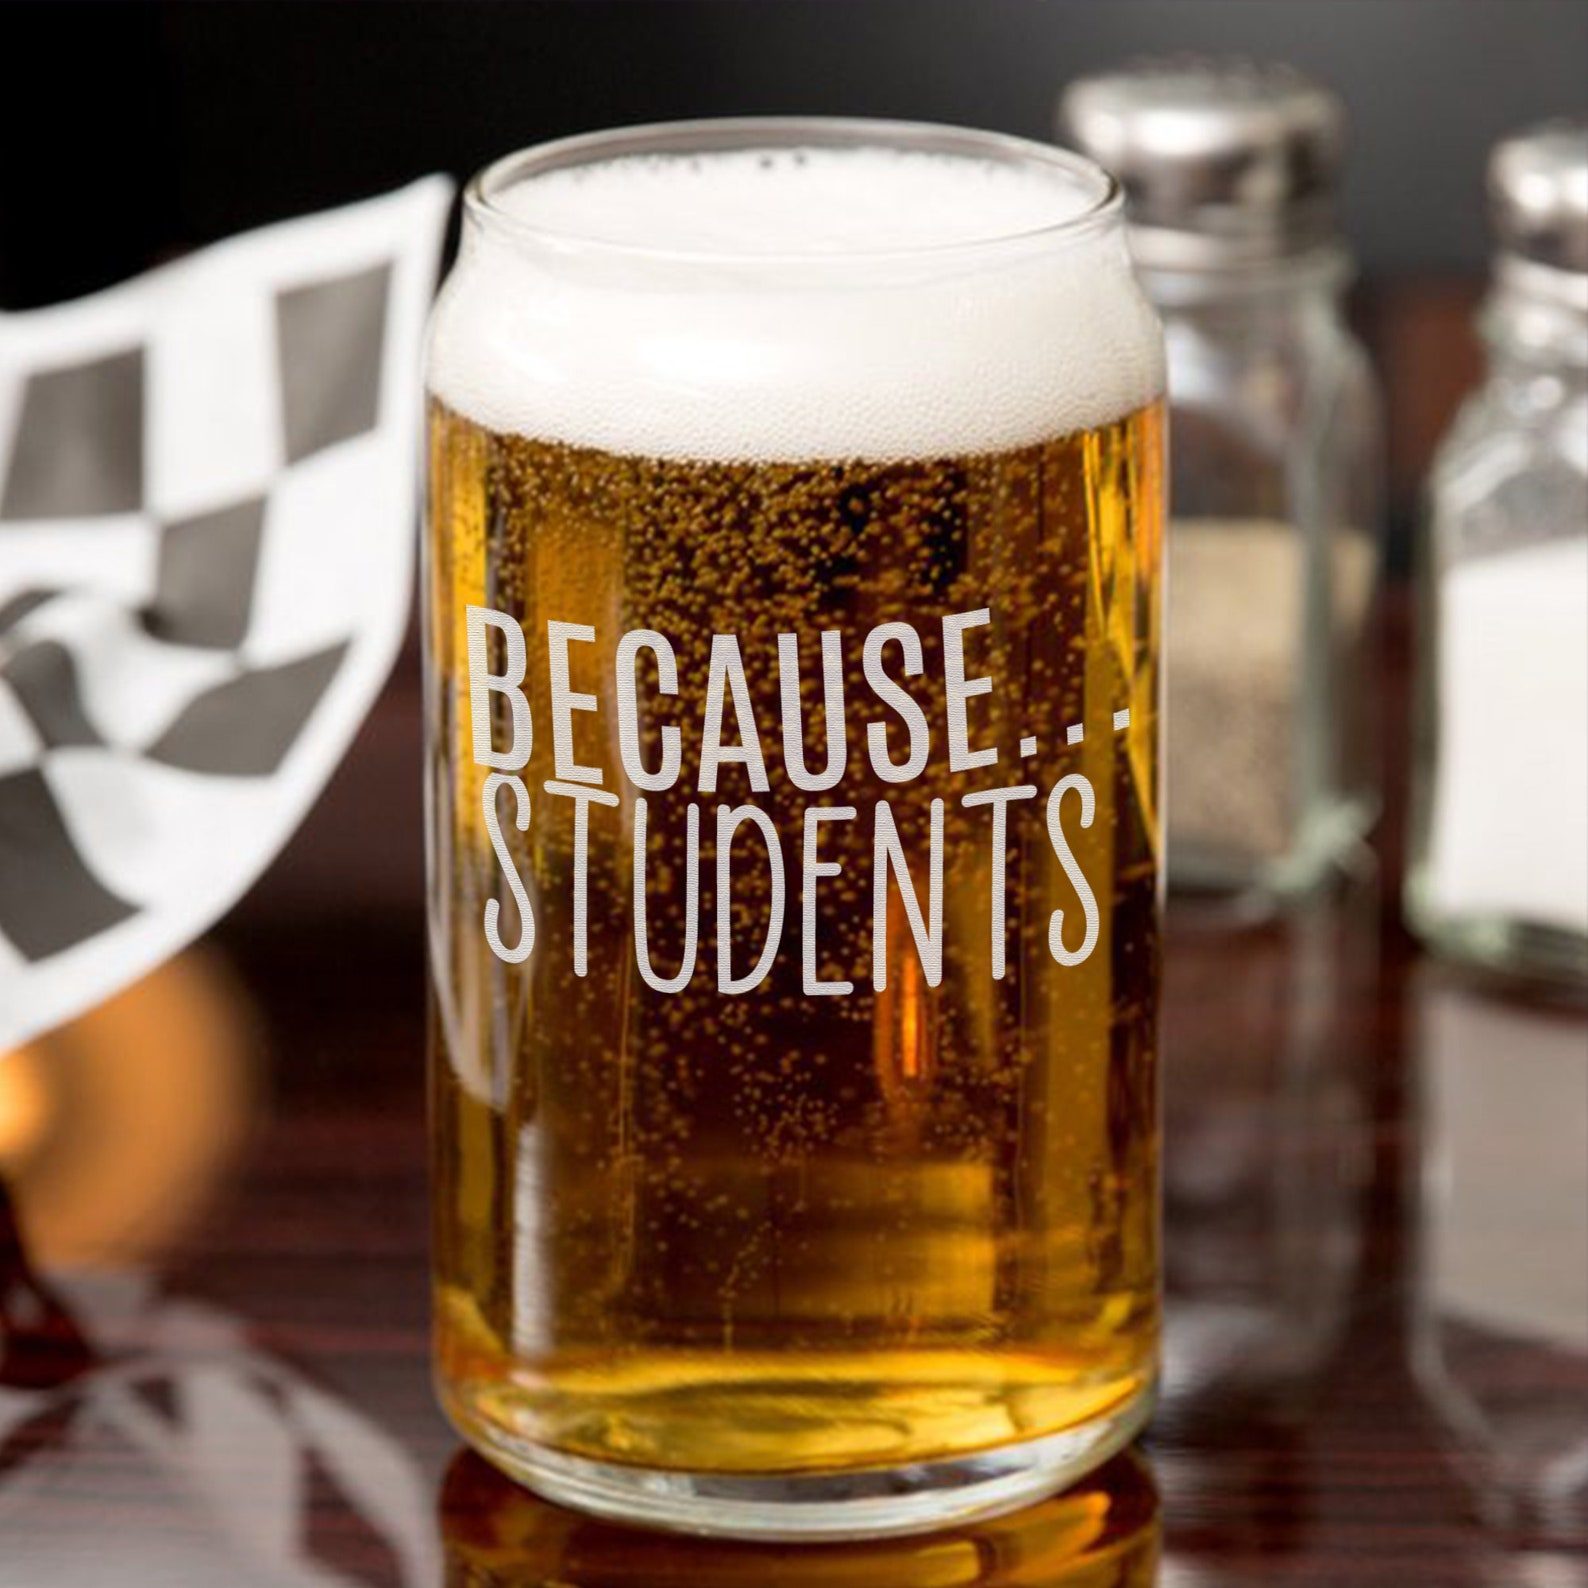 Because Students Beer Glass Ecomm Via Etsy.com